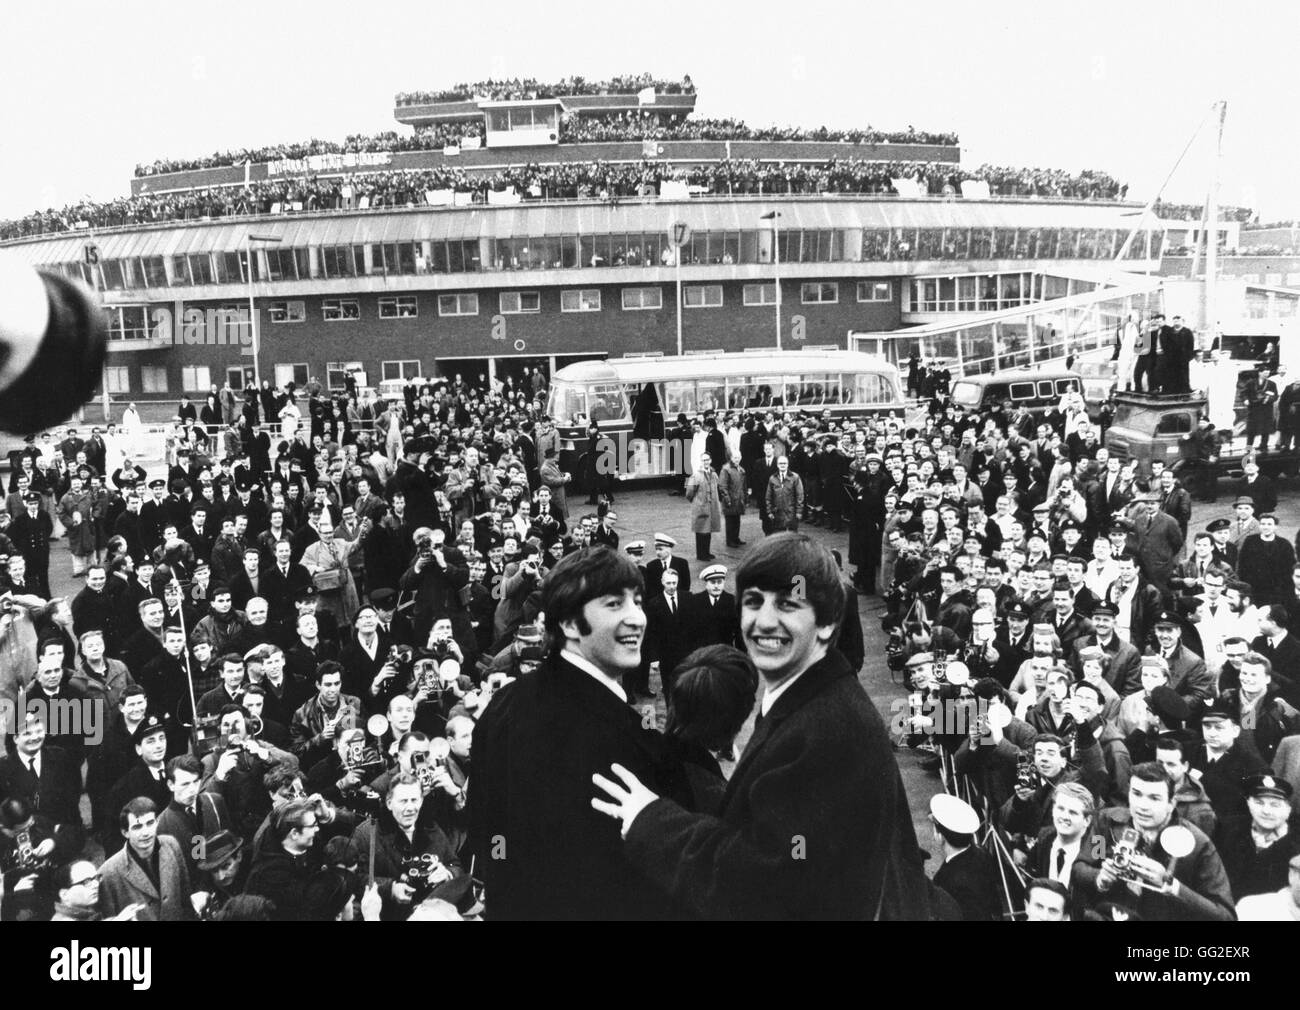 The Beatles arriving at the London Heathrow Airport, after a successful 10 day American Tour. February 22, 1964 England Stock Photo